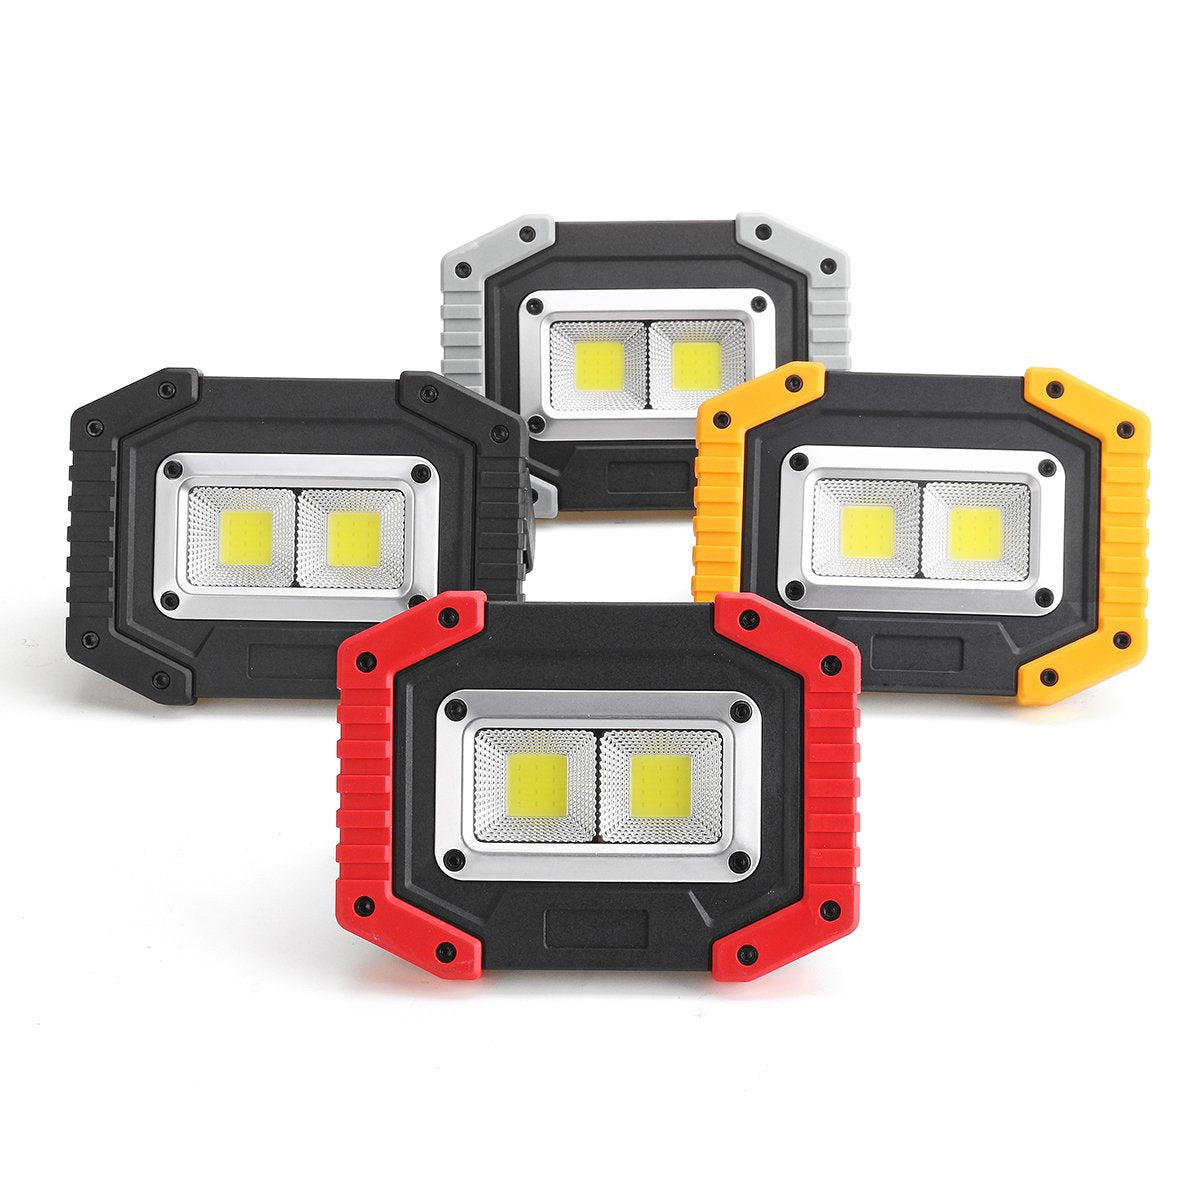 30W LED Work Light for Outdoor Camping, Hiking, Fishing, Emergency Car Repairing